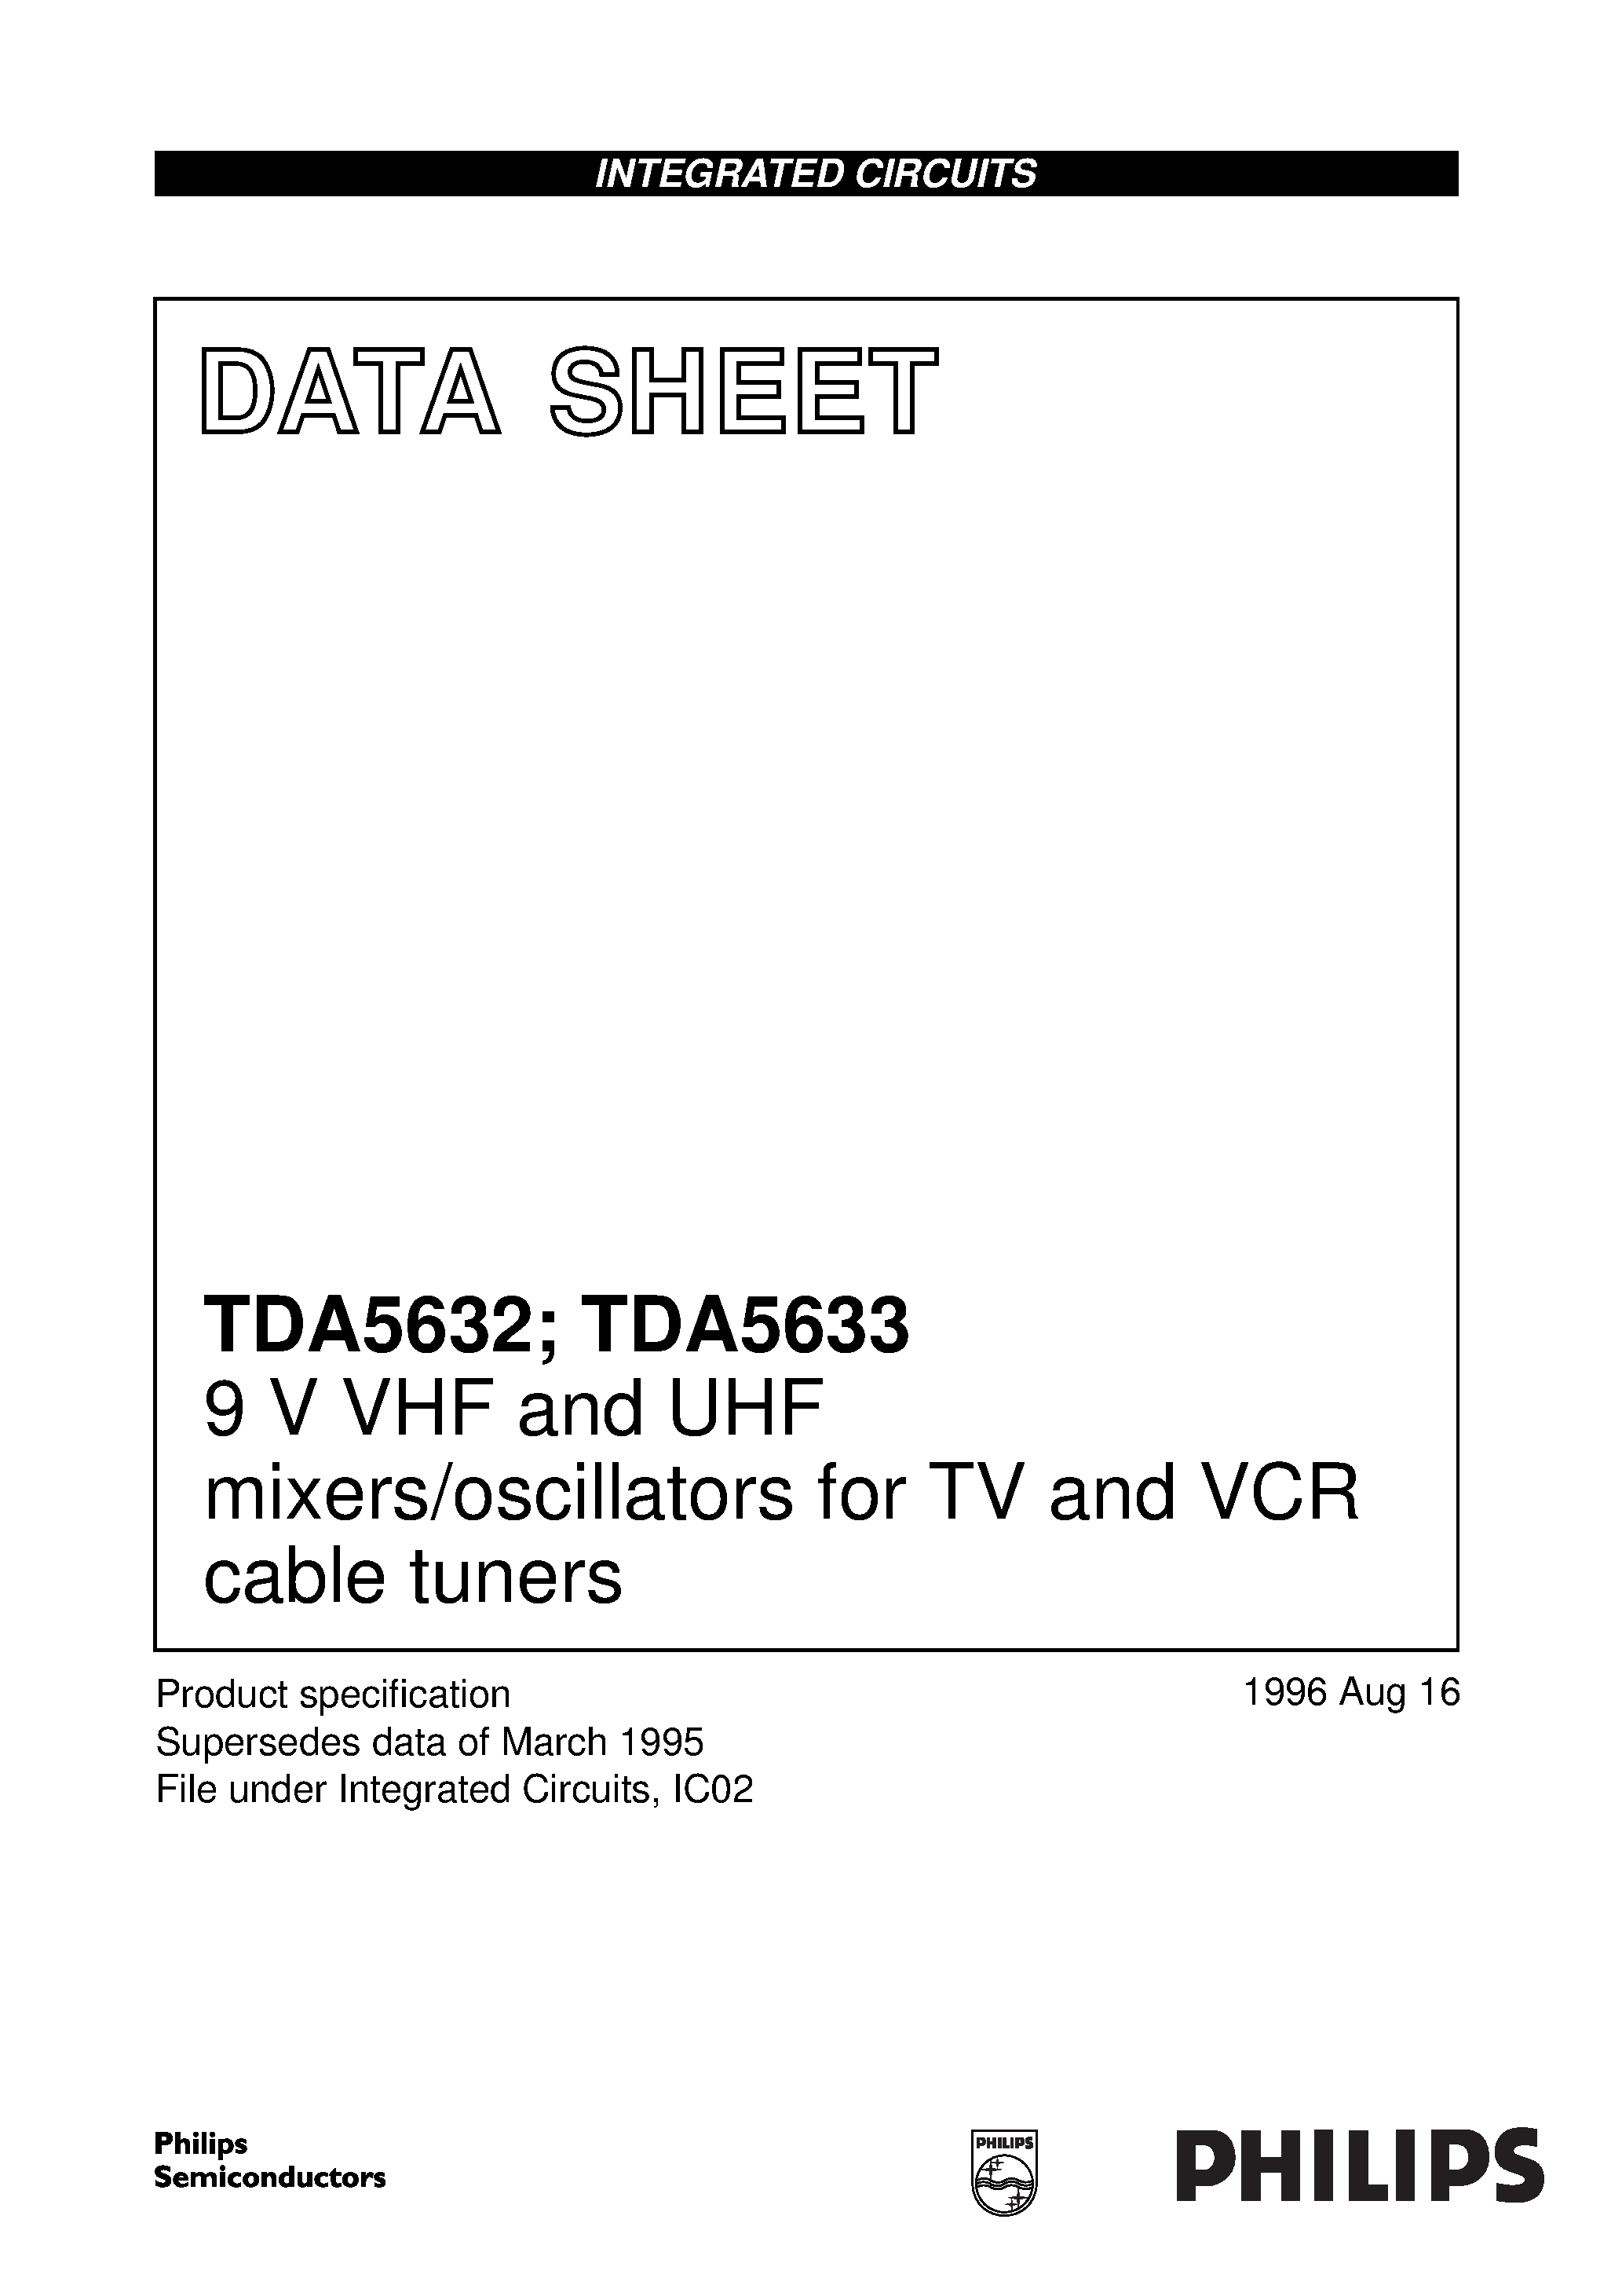 Datasheet TDA5633 - 9 V VHF and UHF mixers/oscillators for TV and VCR cable tuners page 1